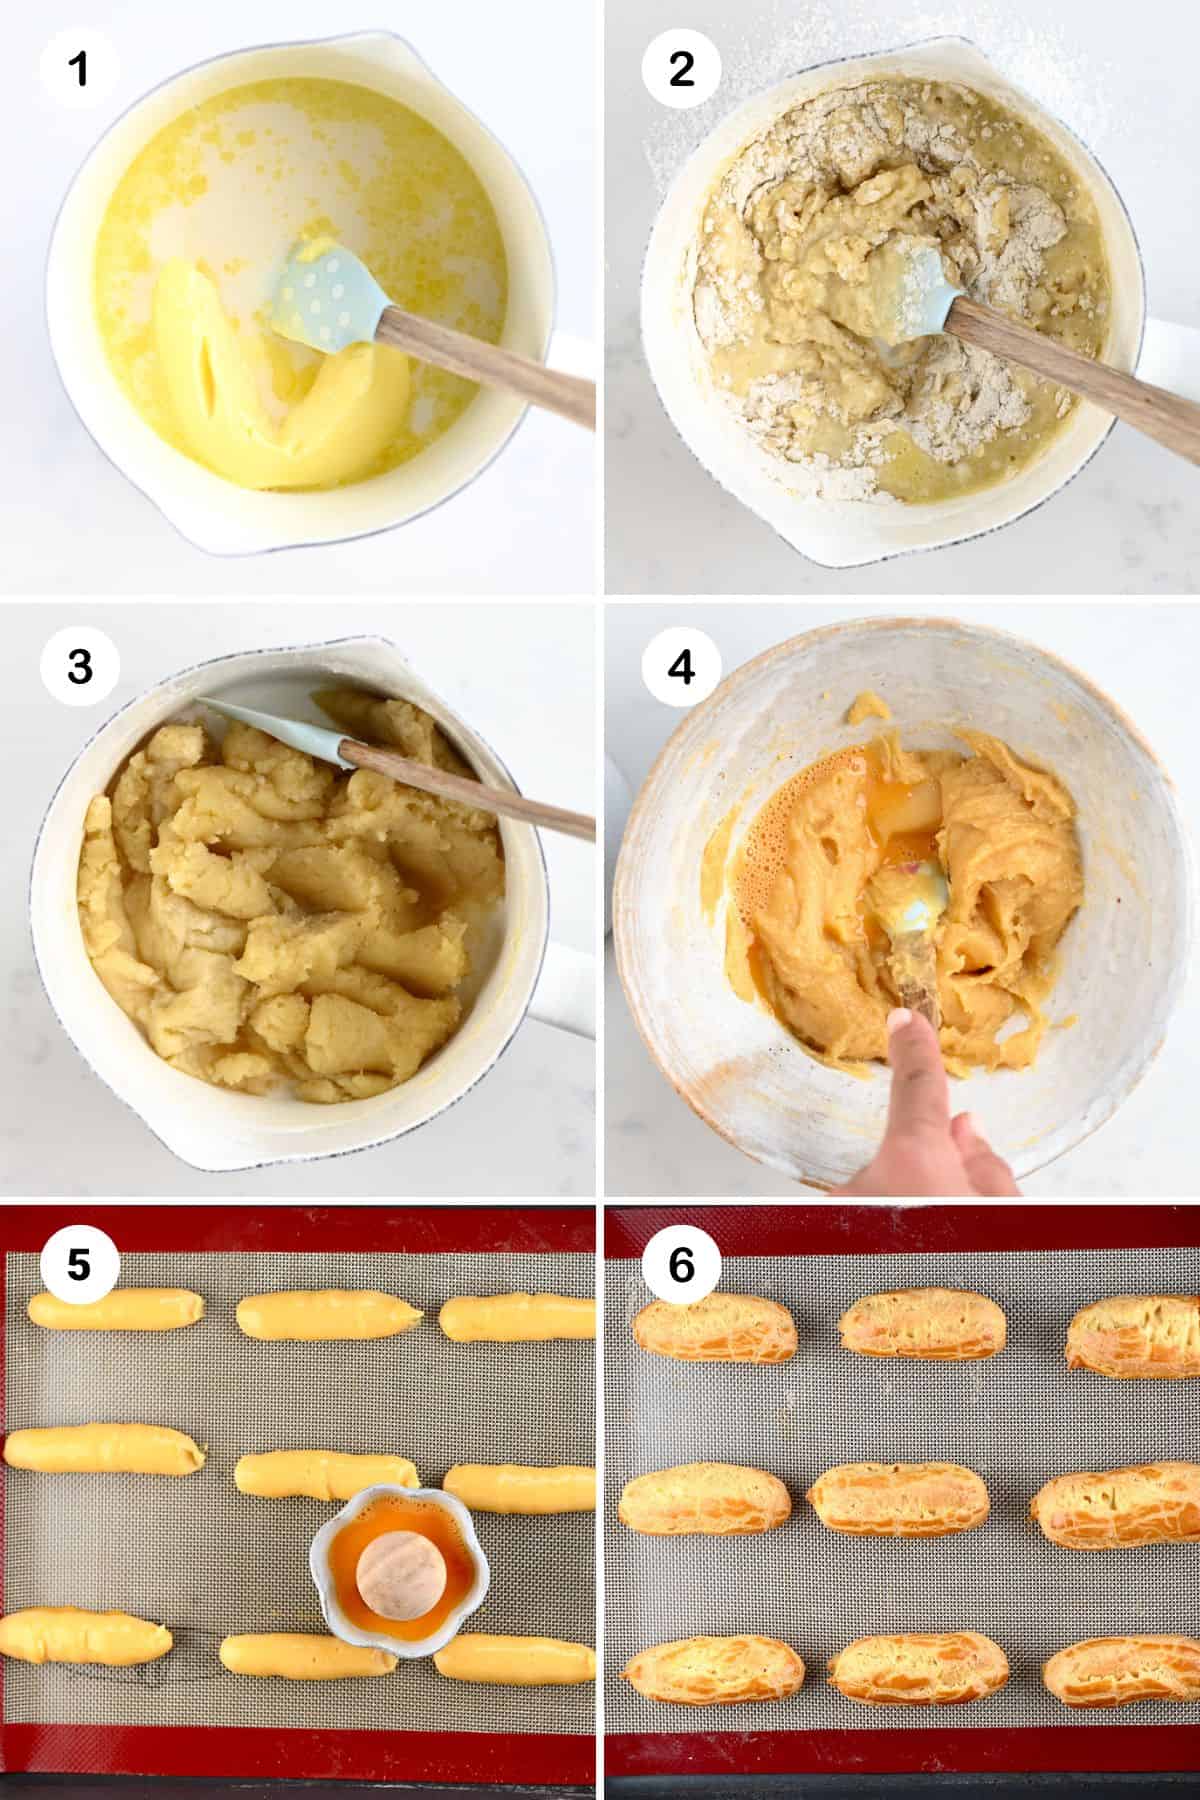 Steps for making choux pastry